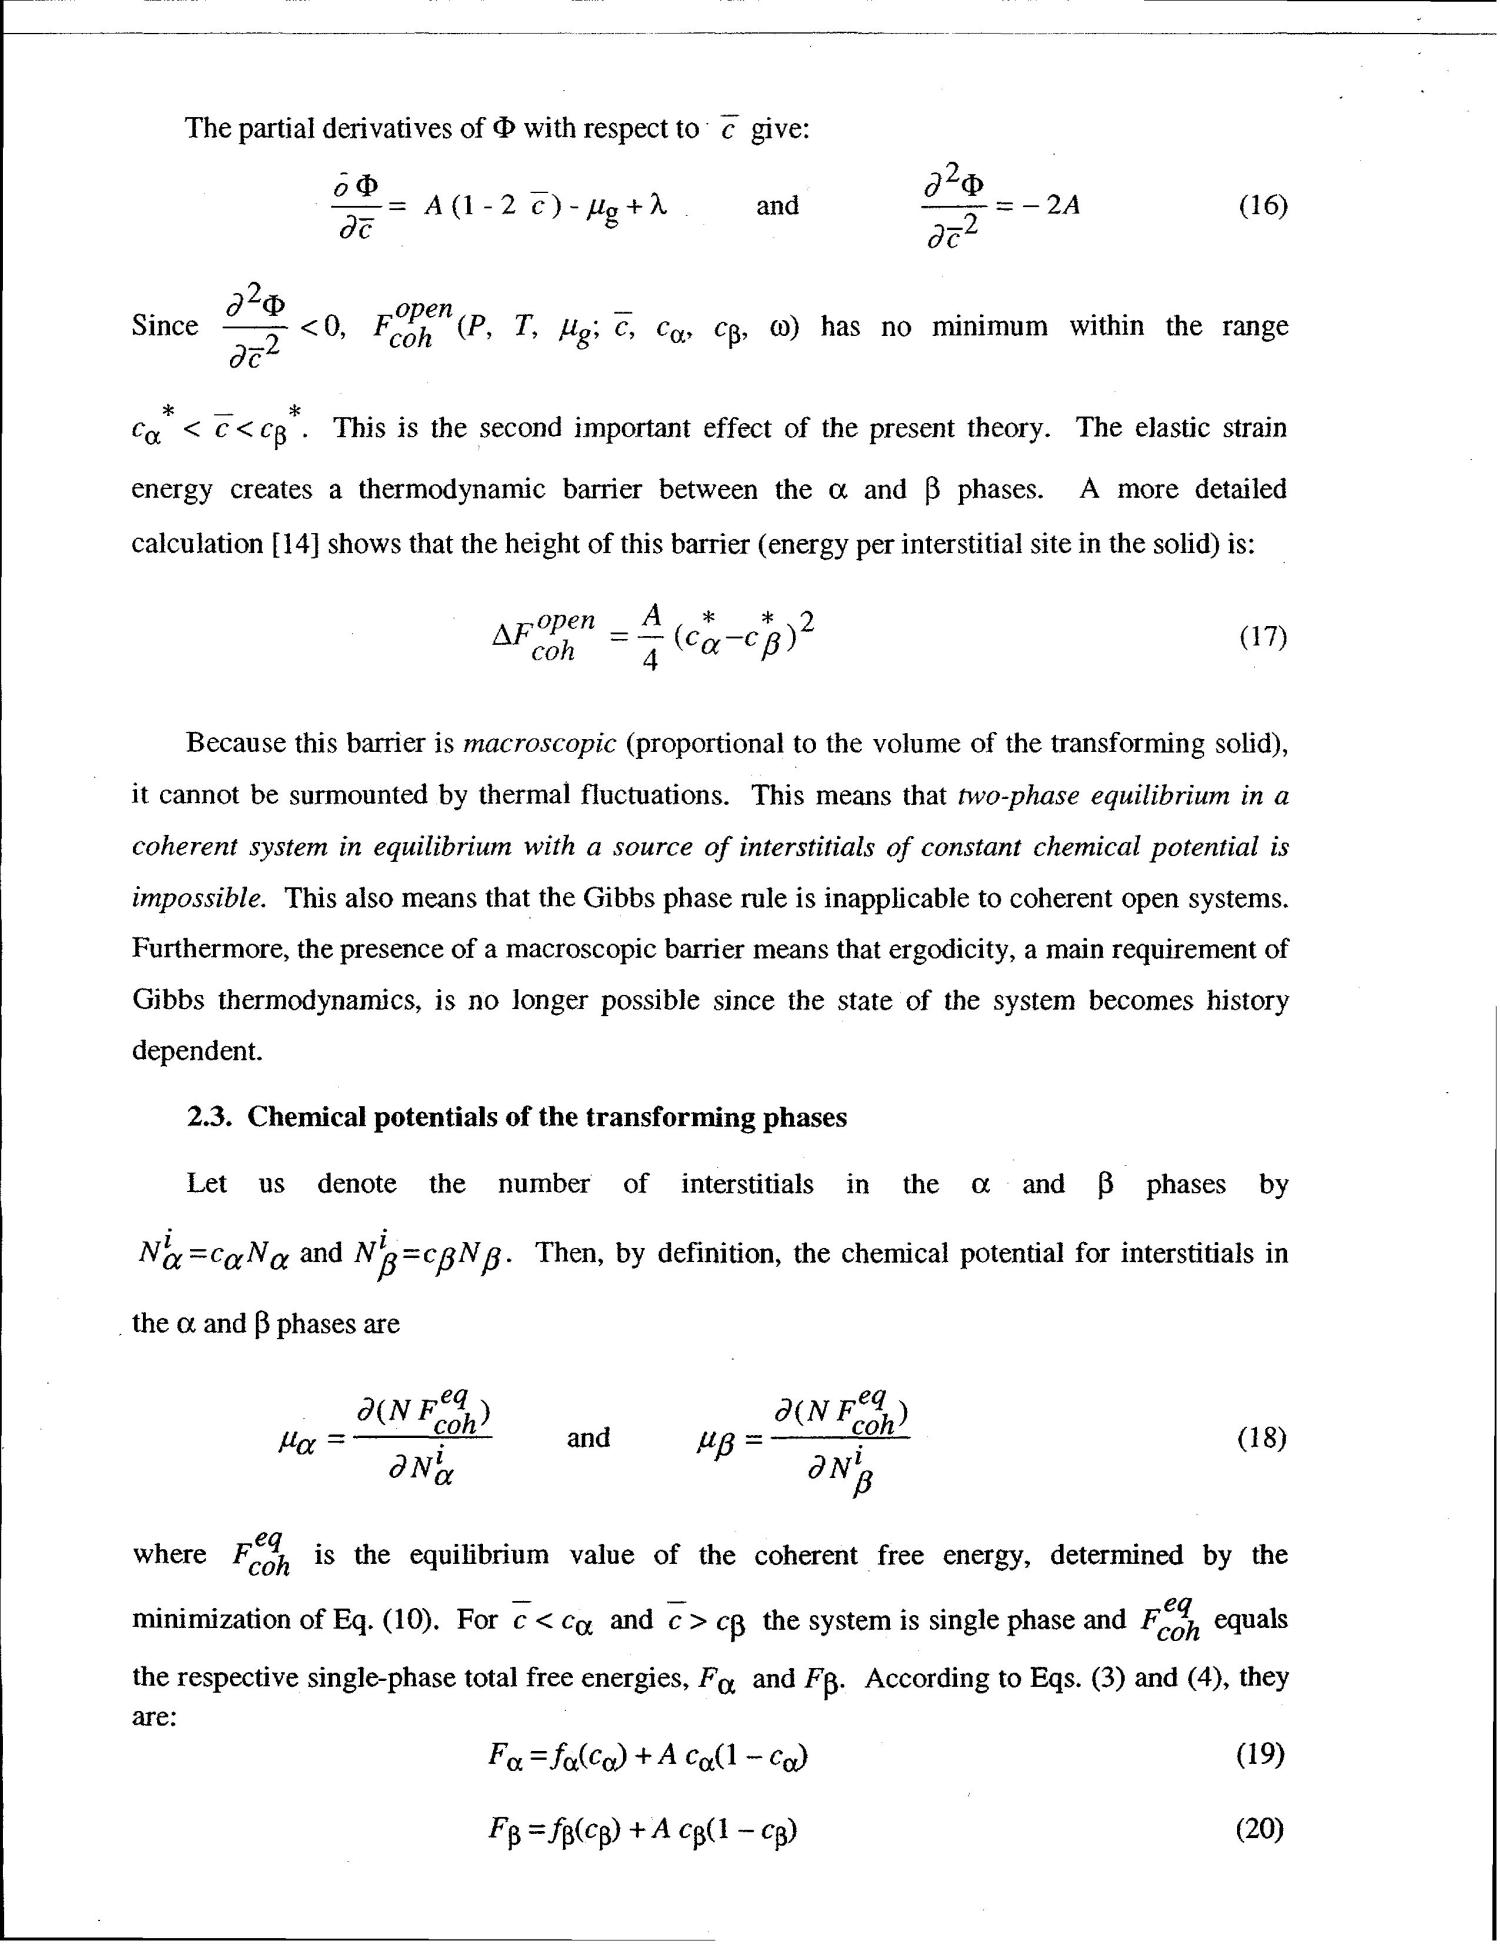 THERMODYNAMIC MODEL FOR THE HYSTERESIS IN METAL-HYDROGEN SYSTEMS - Page ...